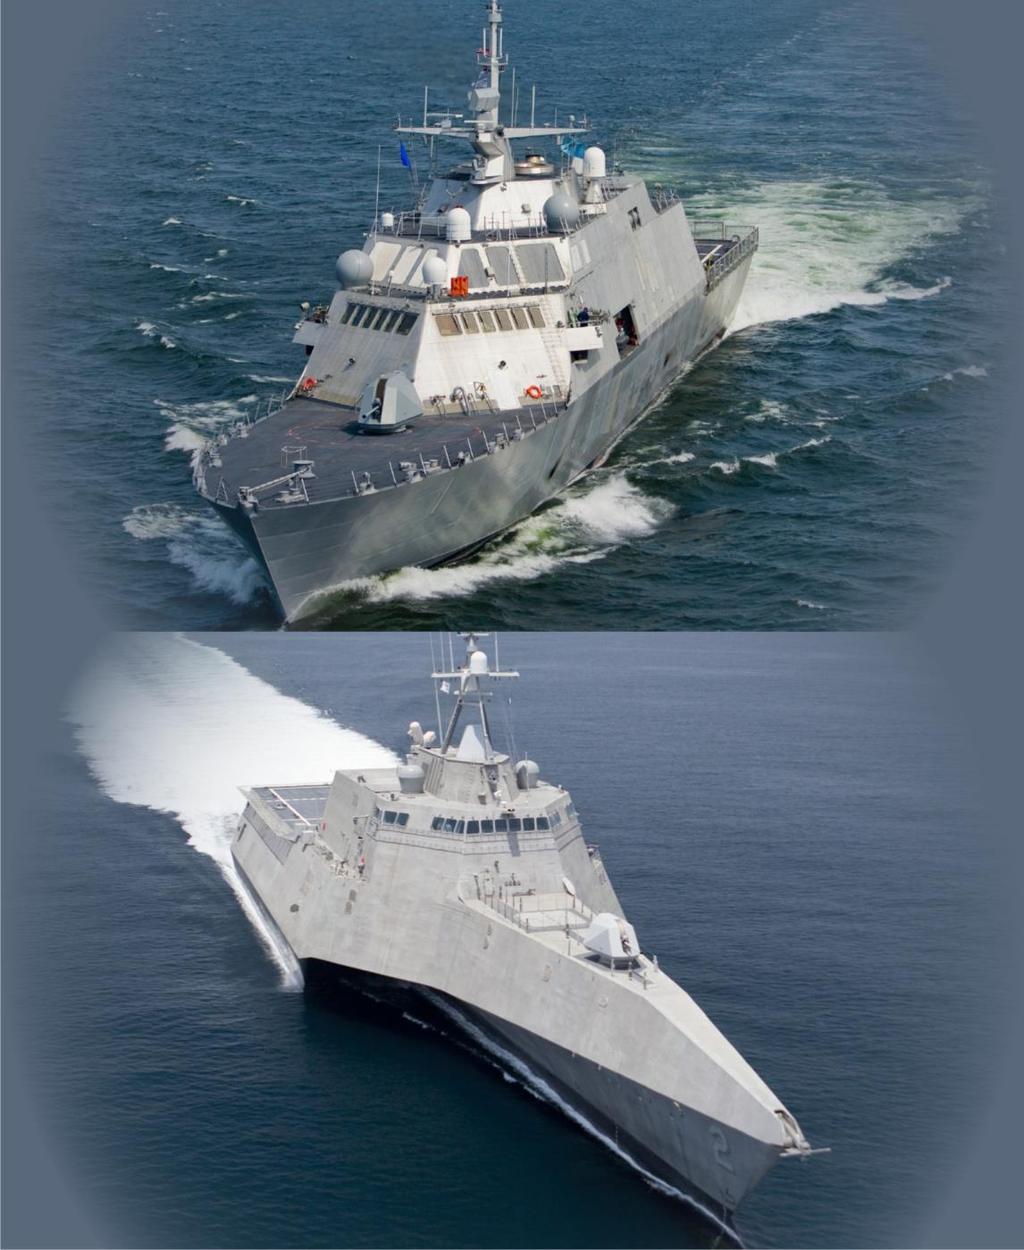 LCSs (i.e., LCS-1, LCS-3, LCS-5, and so on) use the Lockheed design; even-numbered LCSs (i.e., LCS-2, LCS-4, LCS-6, and so on) use the GD design. Figure 1.